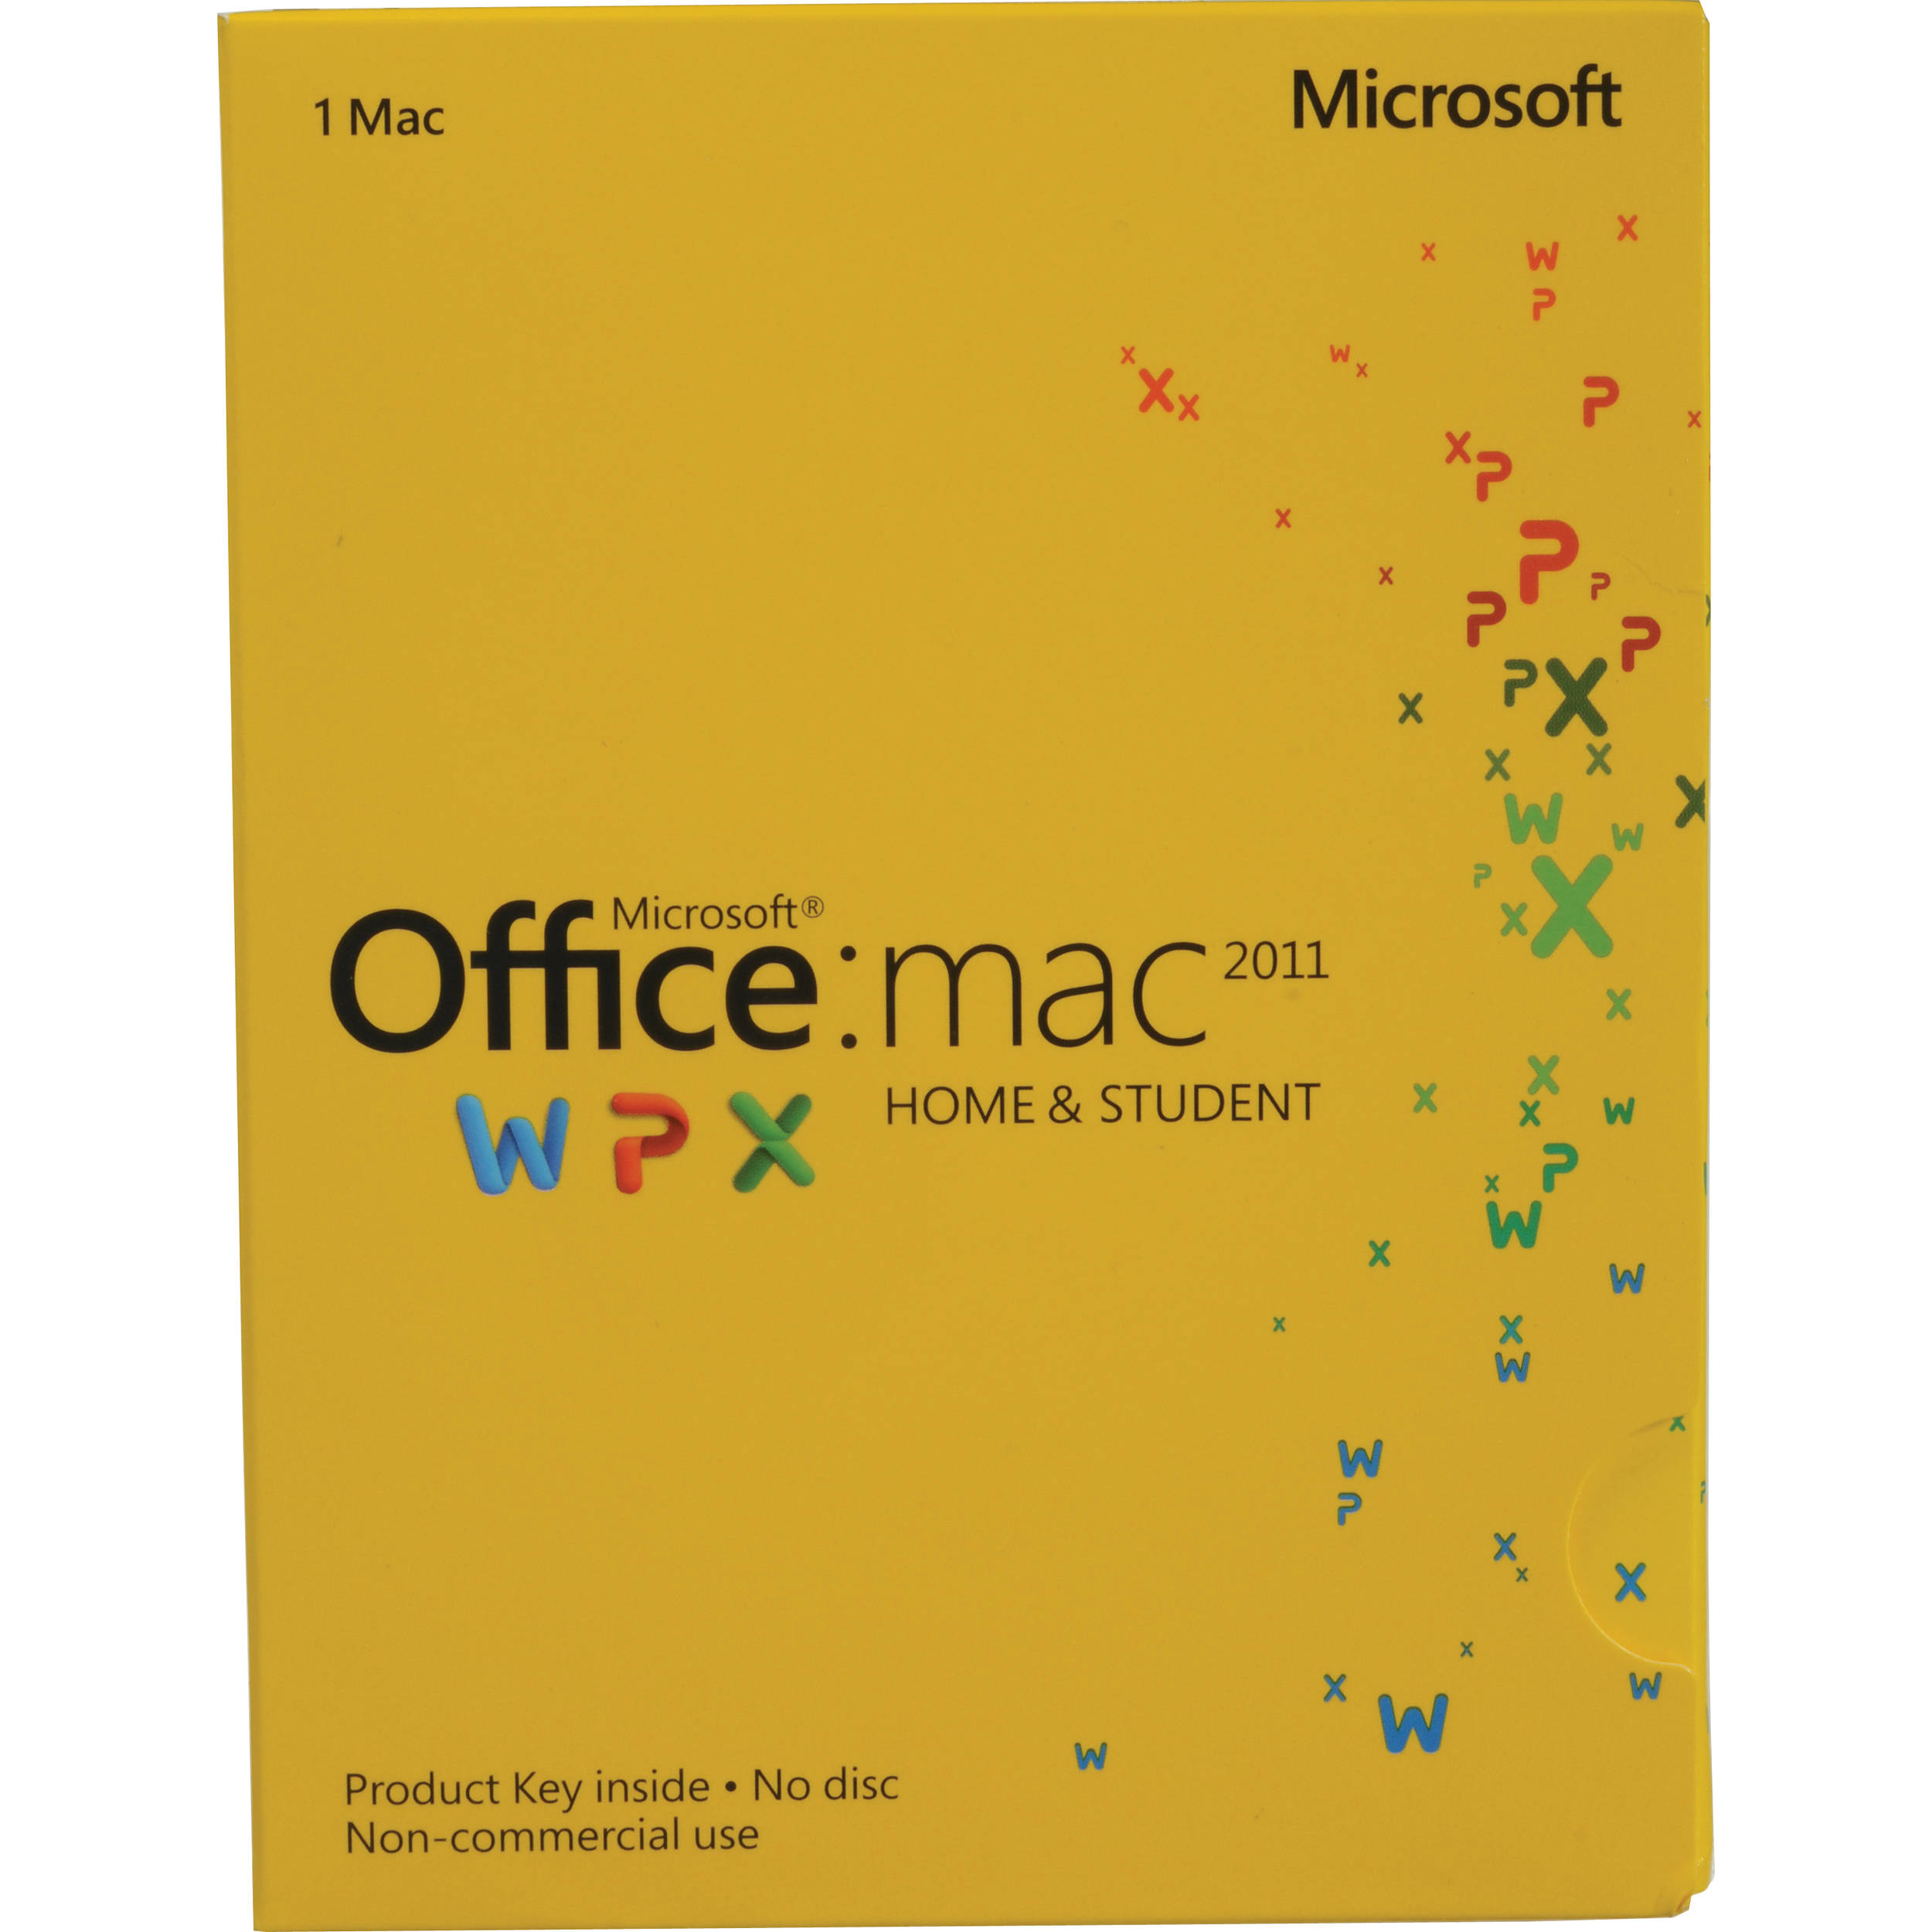 Mac office 2011 home student download free